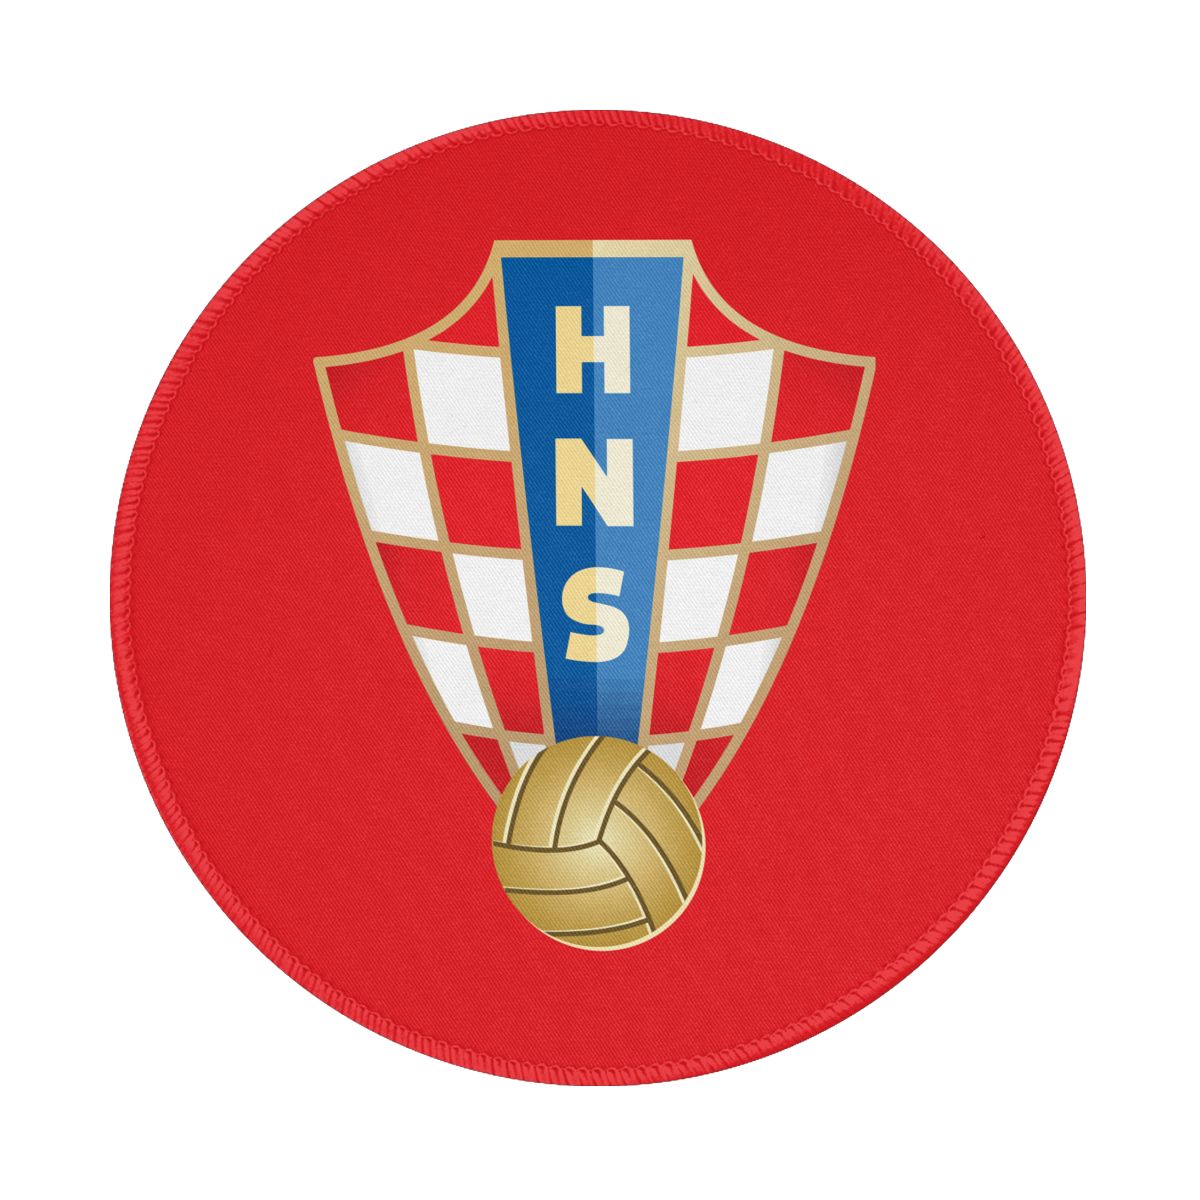 Croatia National Football Team Waterproof Round Mouse Pad for Wireless Mouse